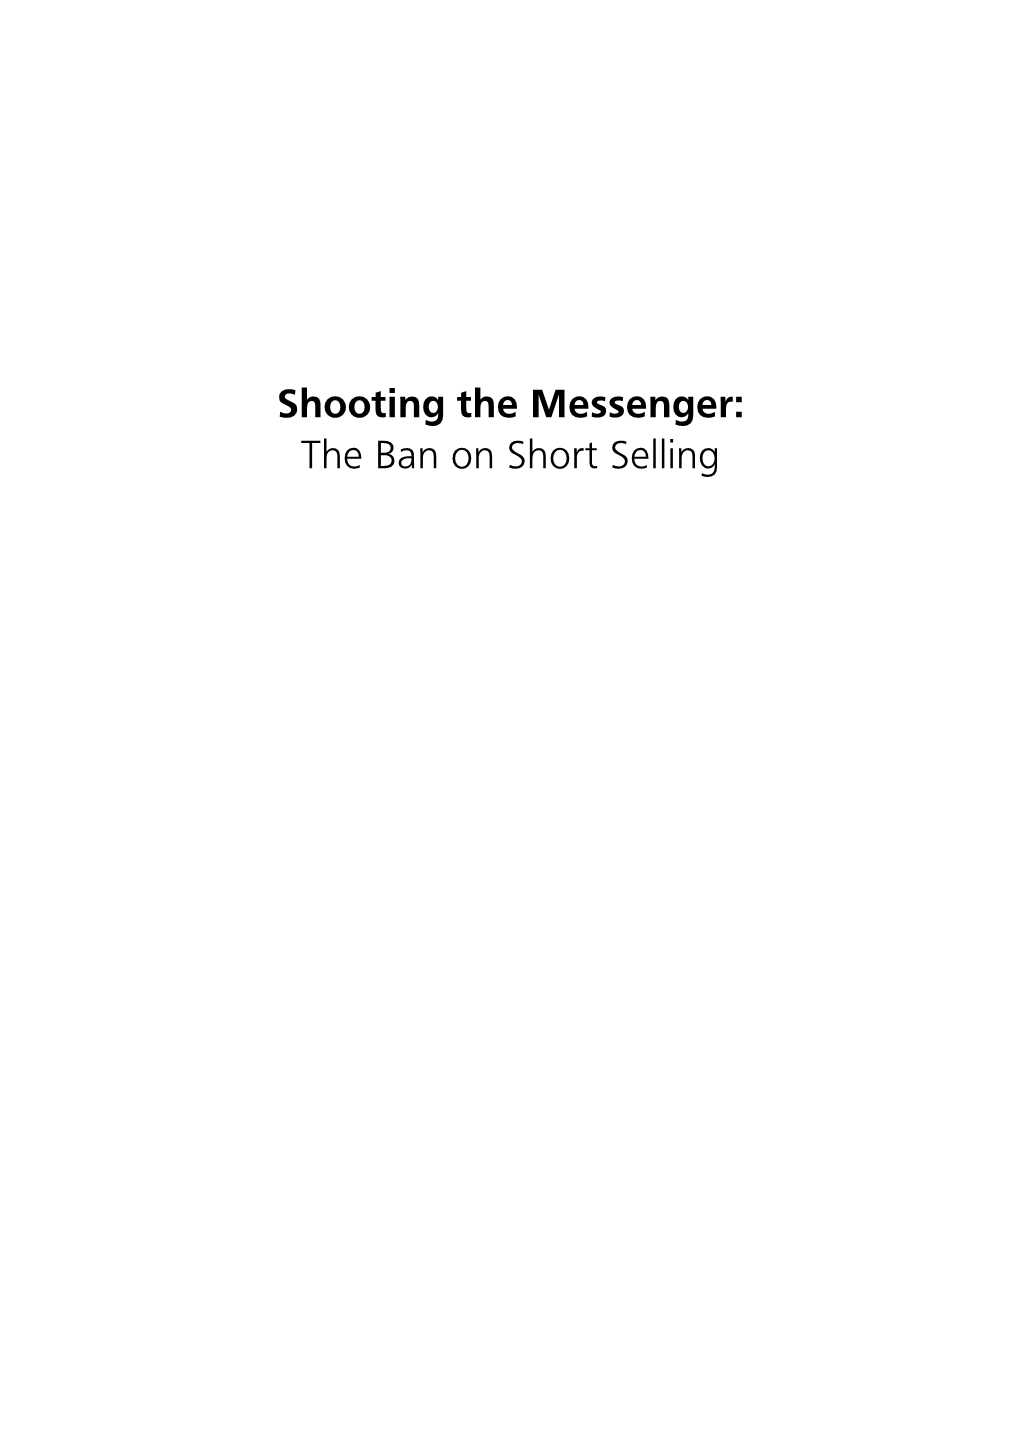 Shooting the Messenger: the Ban on Short Selling